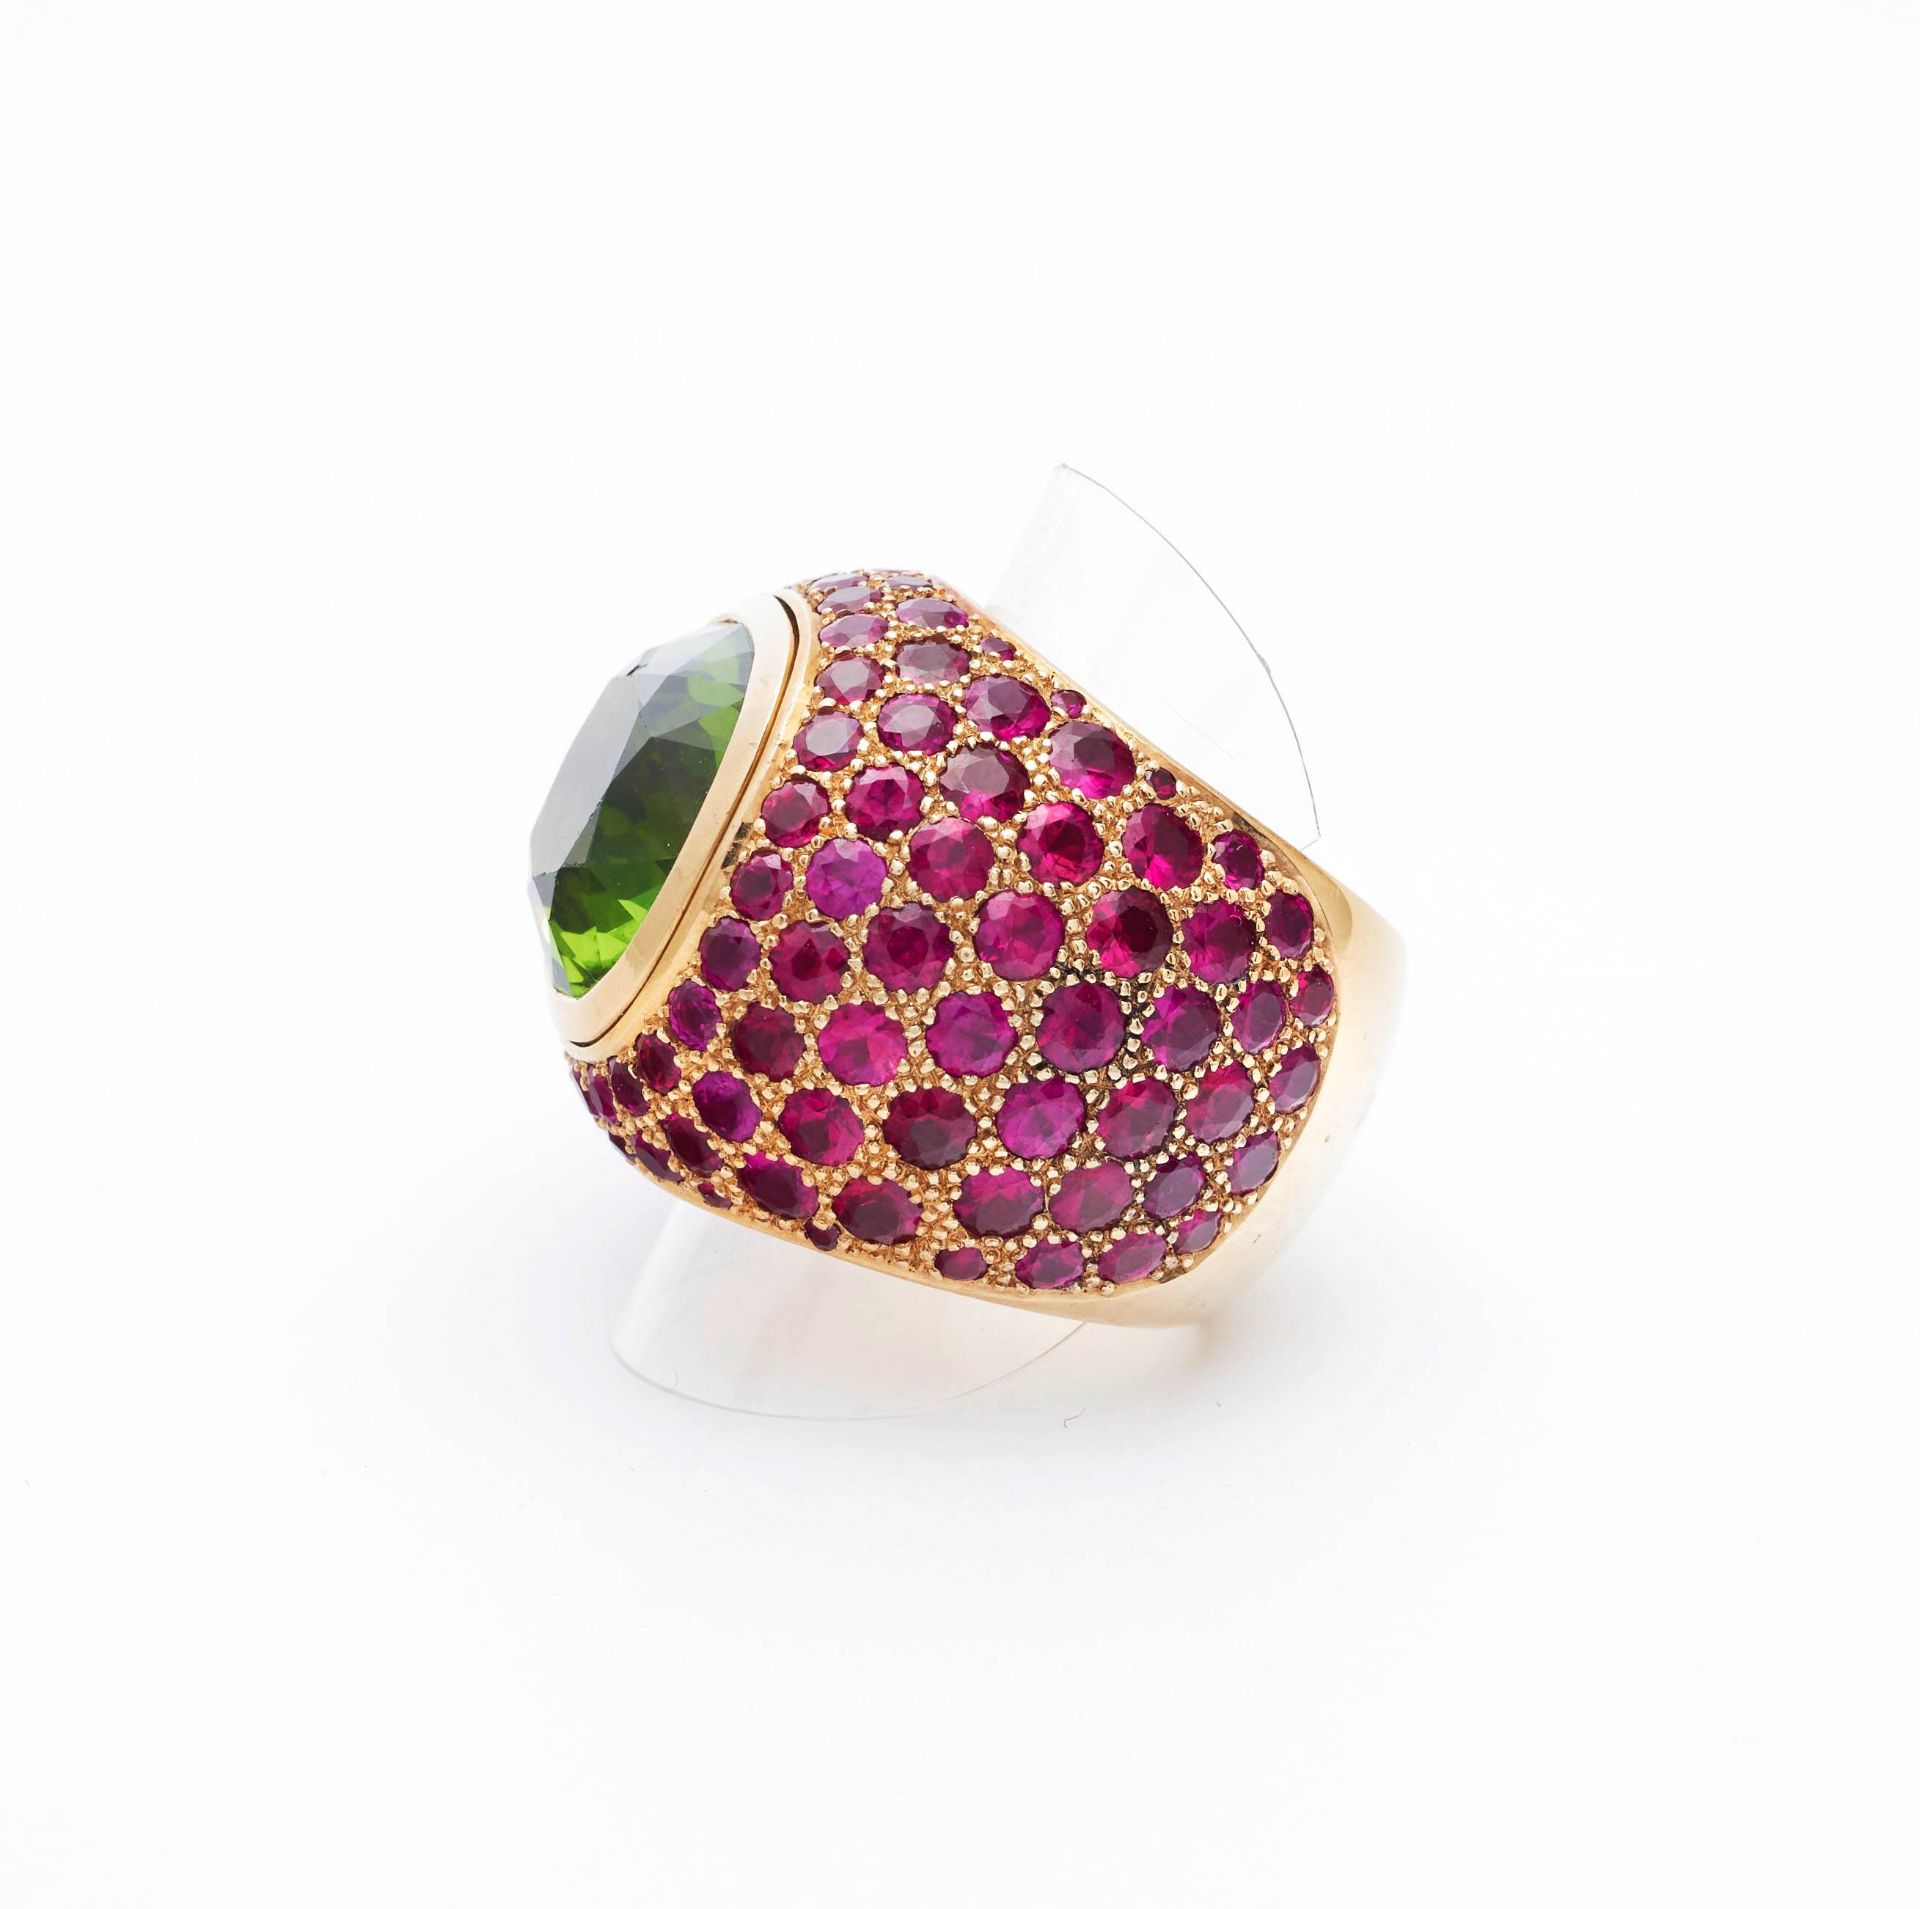 PERIDOT, RUBY AND GOLD RING, BY MAJO FRUITHOF. - Image 2 of 4